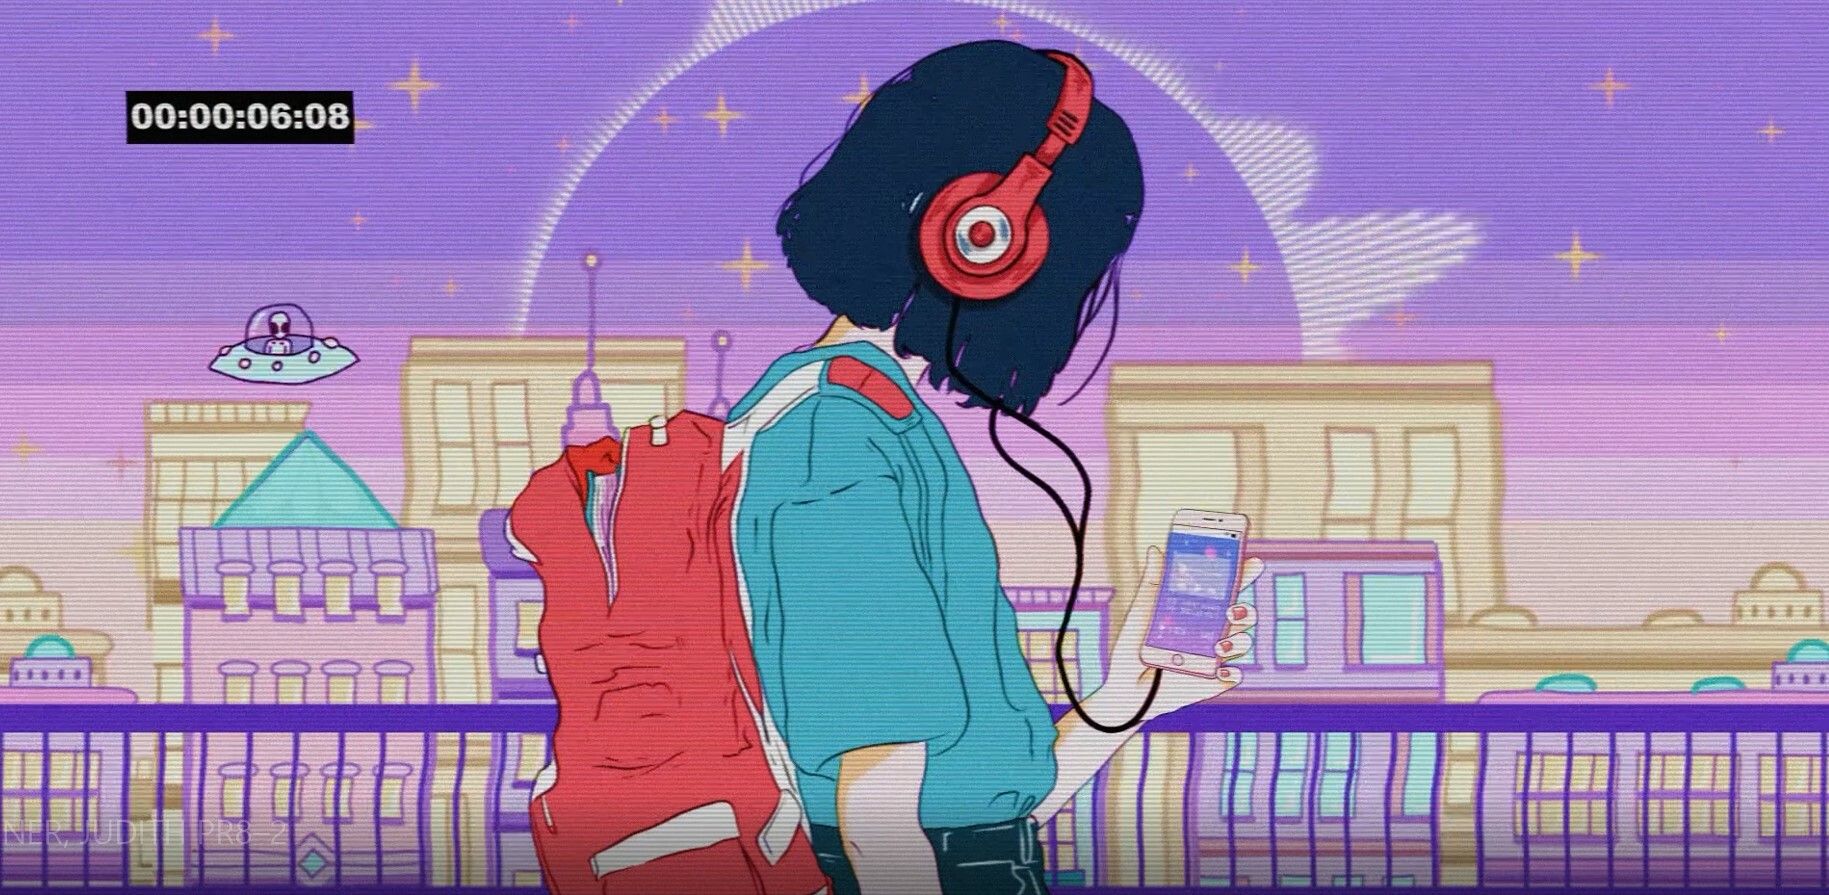 A girl wearing headphones walking with a phone in her hand - Lo fi